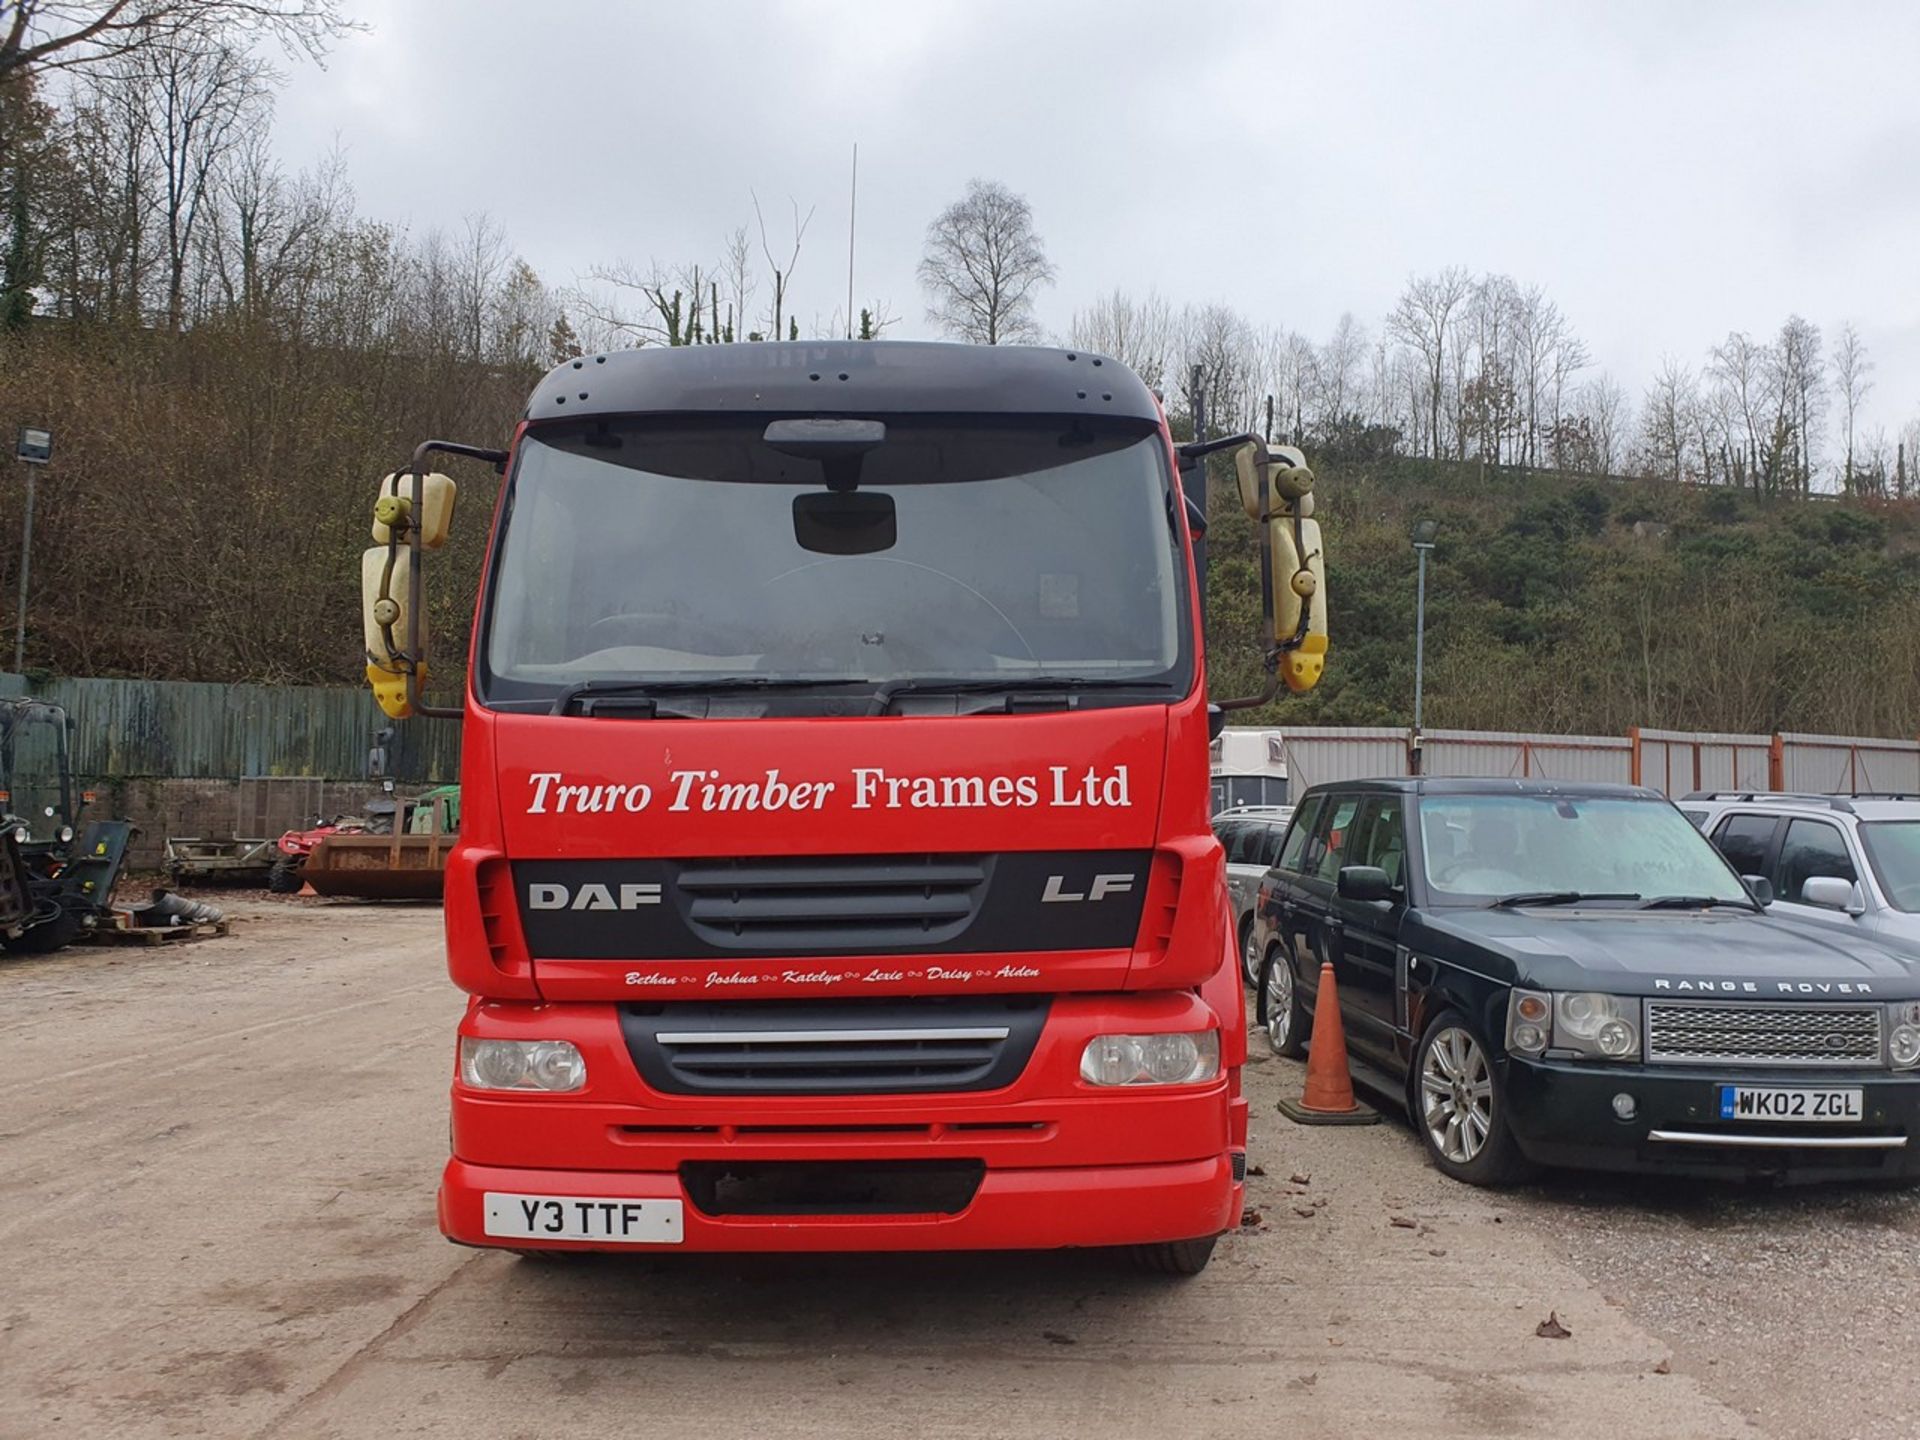 13/13 DAF TRUCKS FLAT BED - 6693cc 2dr (Red) - Image 16 of 23